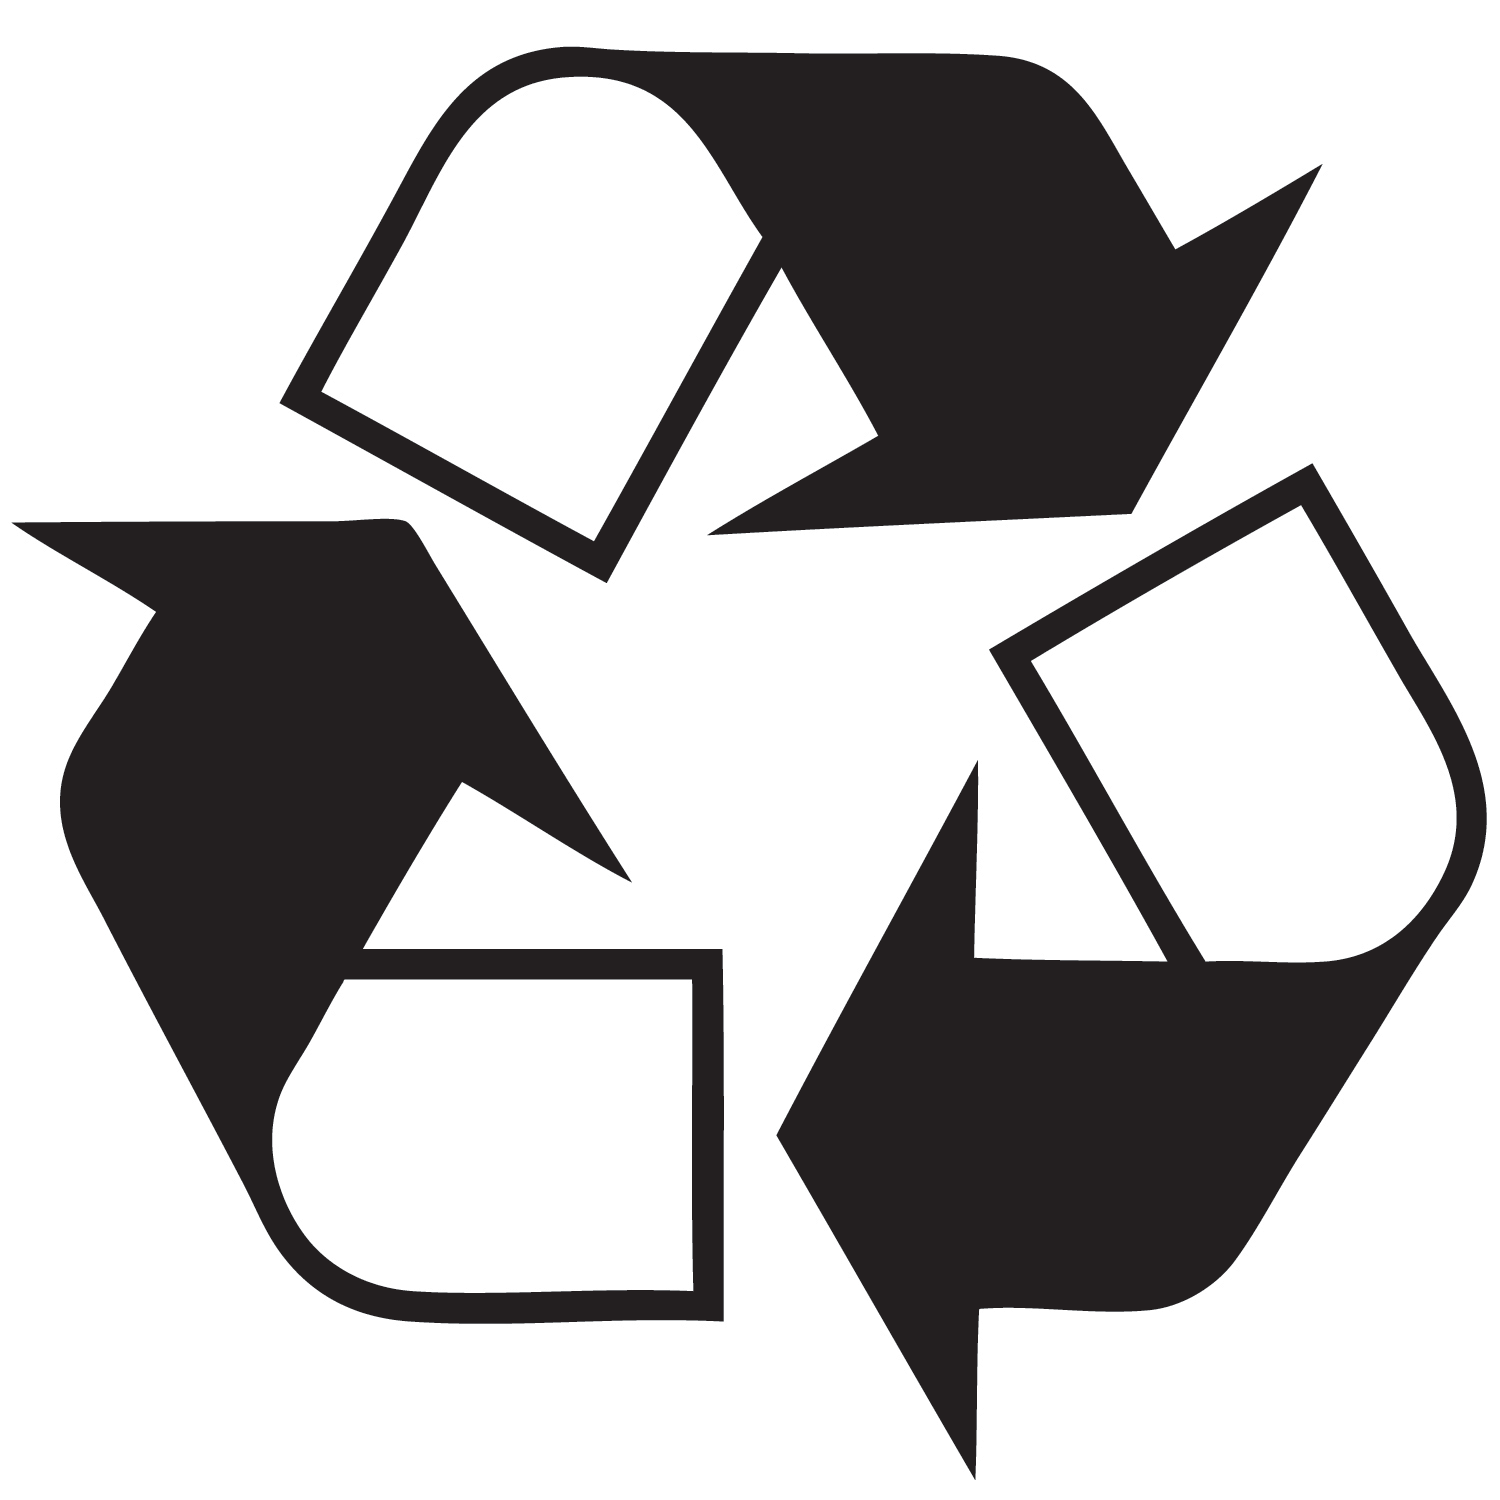 Recycle clip art free vector 